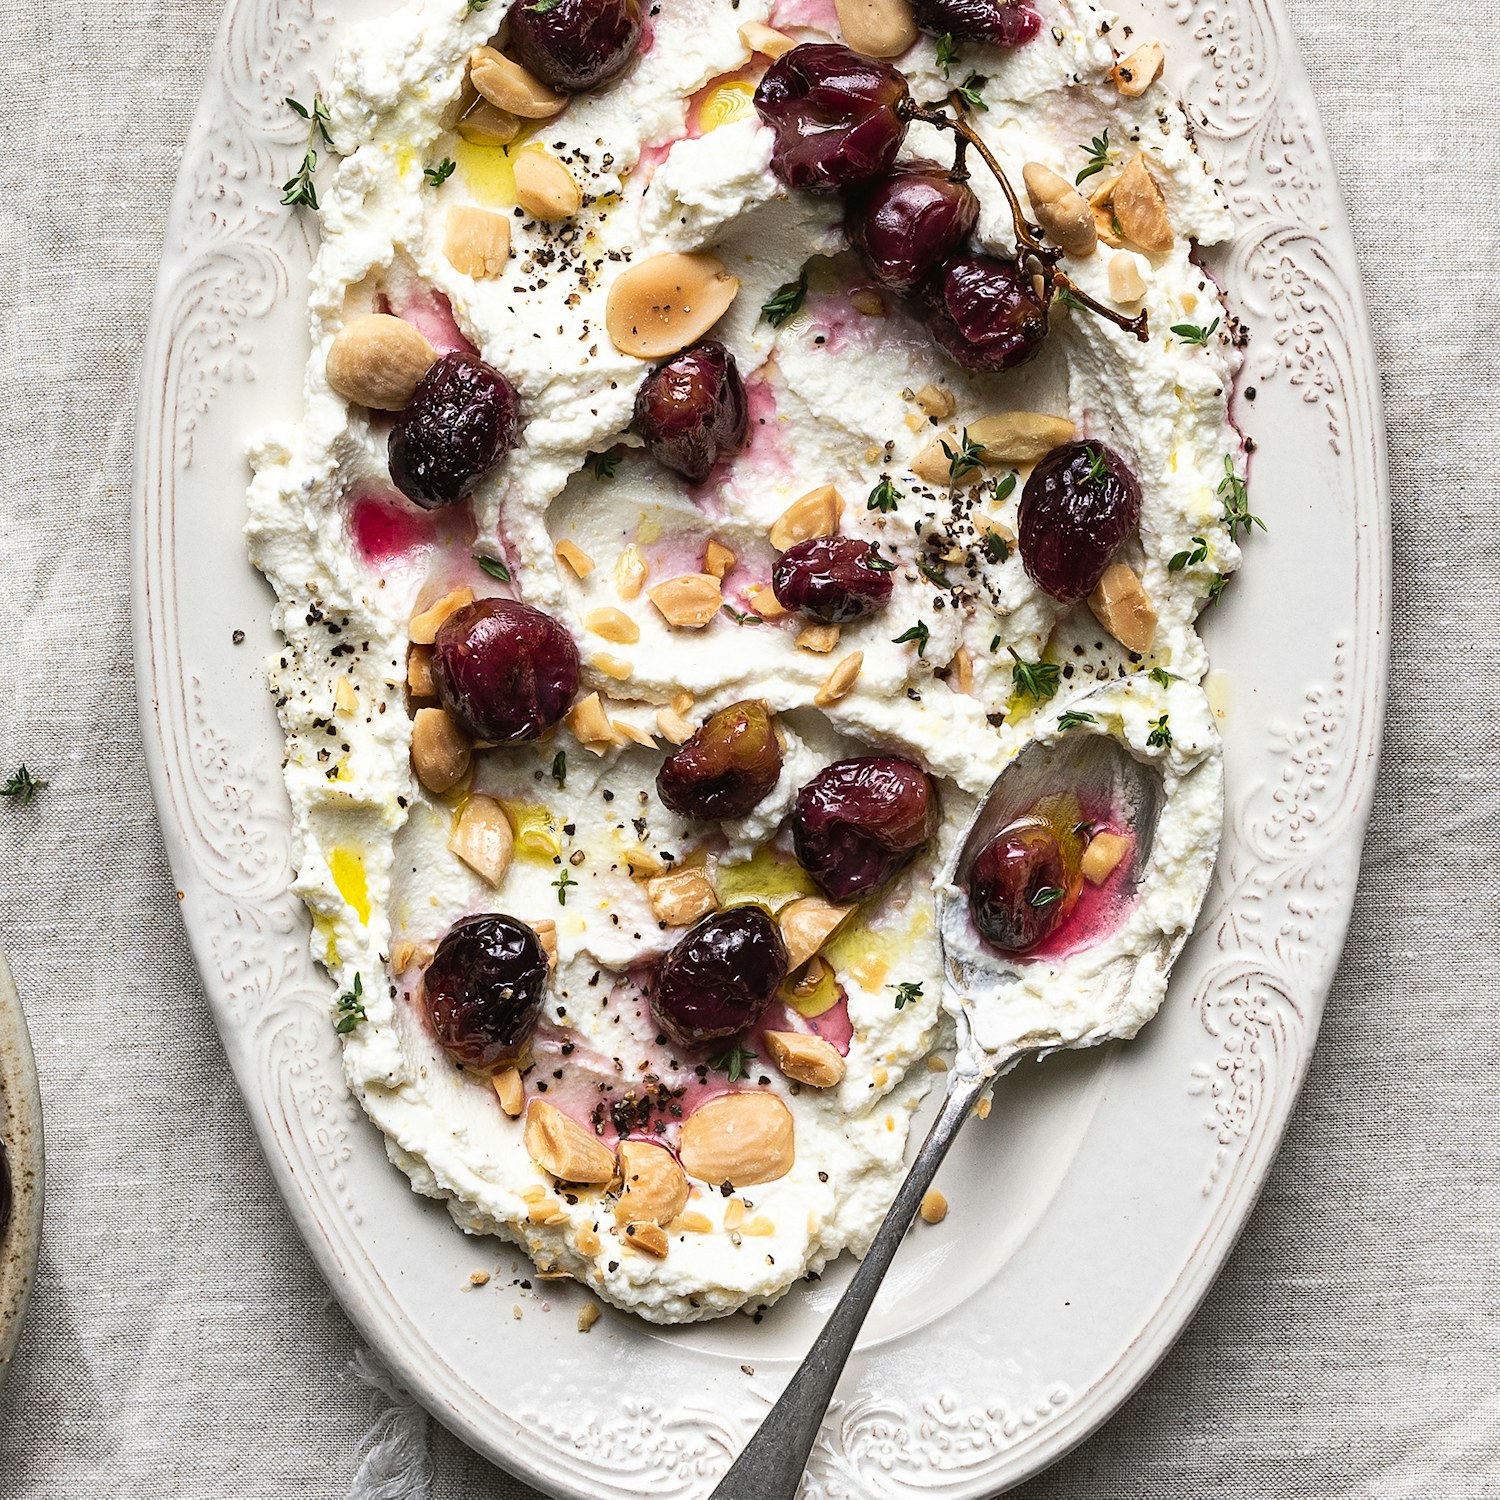 Whipped Ricotta, Roasted Grape and Salted Almond Dip